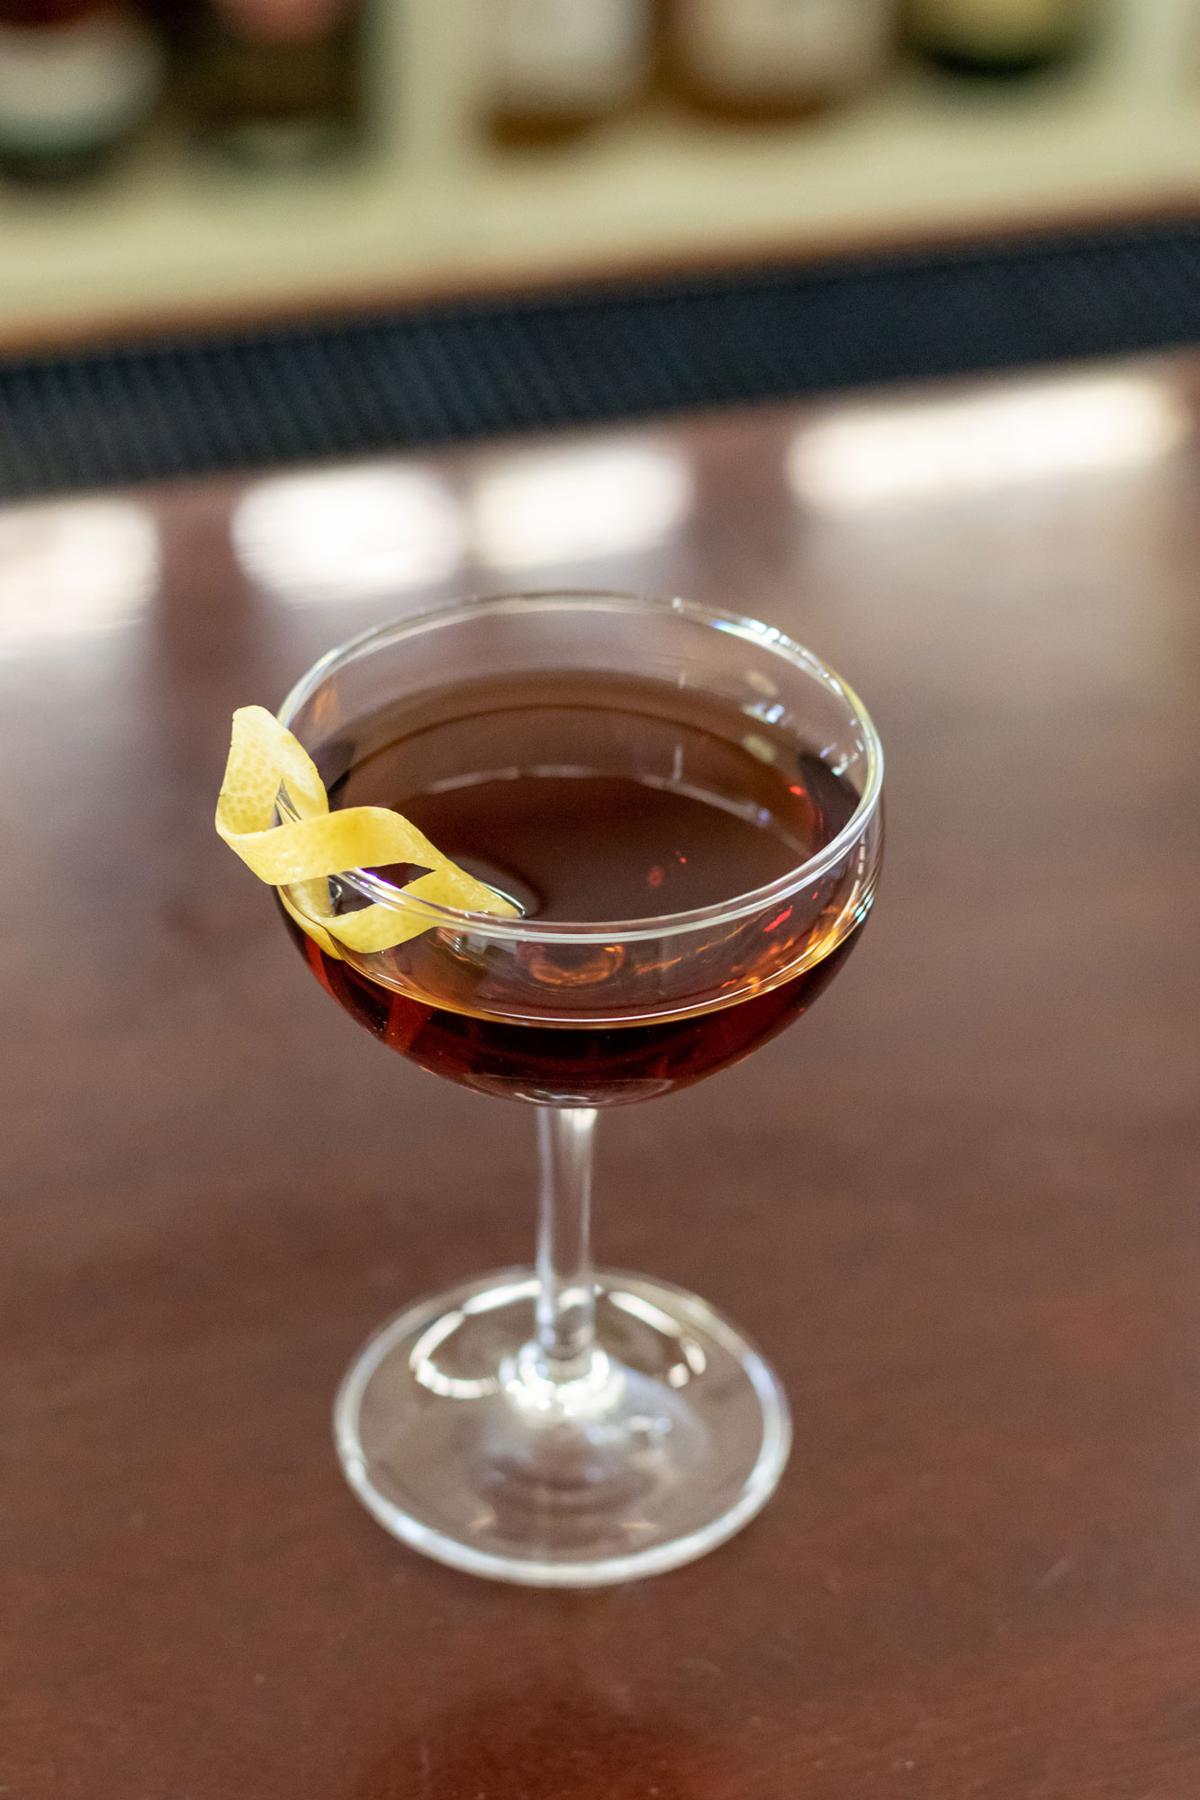 An example of the Coronation, the mixed drink (drink), by Waldorf-Astoria Bar Book, featuring apple brandy, Dolin Dry Vermouth de Chambéry, Timbal Vermut de Reus Sweet Red, apricot eau de vie, and lemon twist; photo by Boon and Caro Sheridan